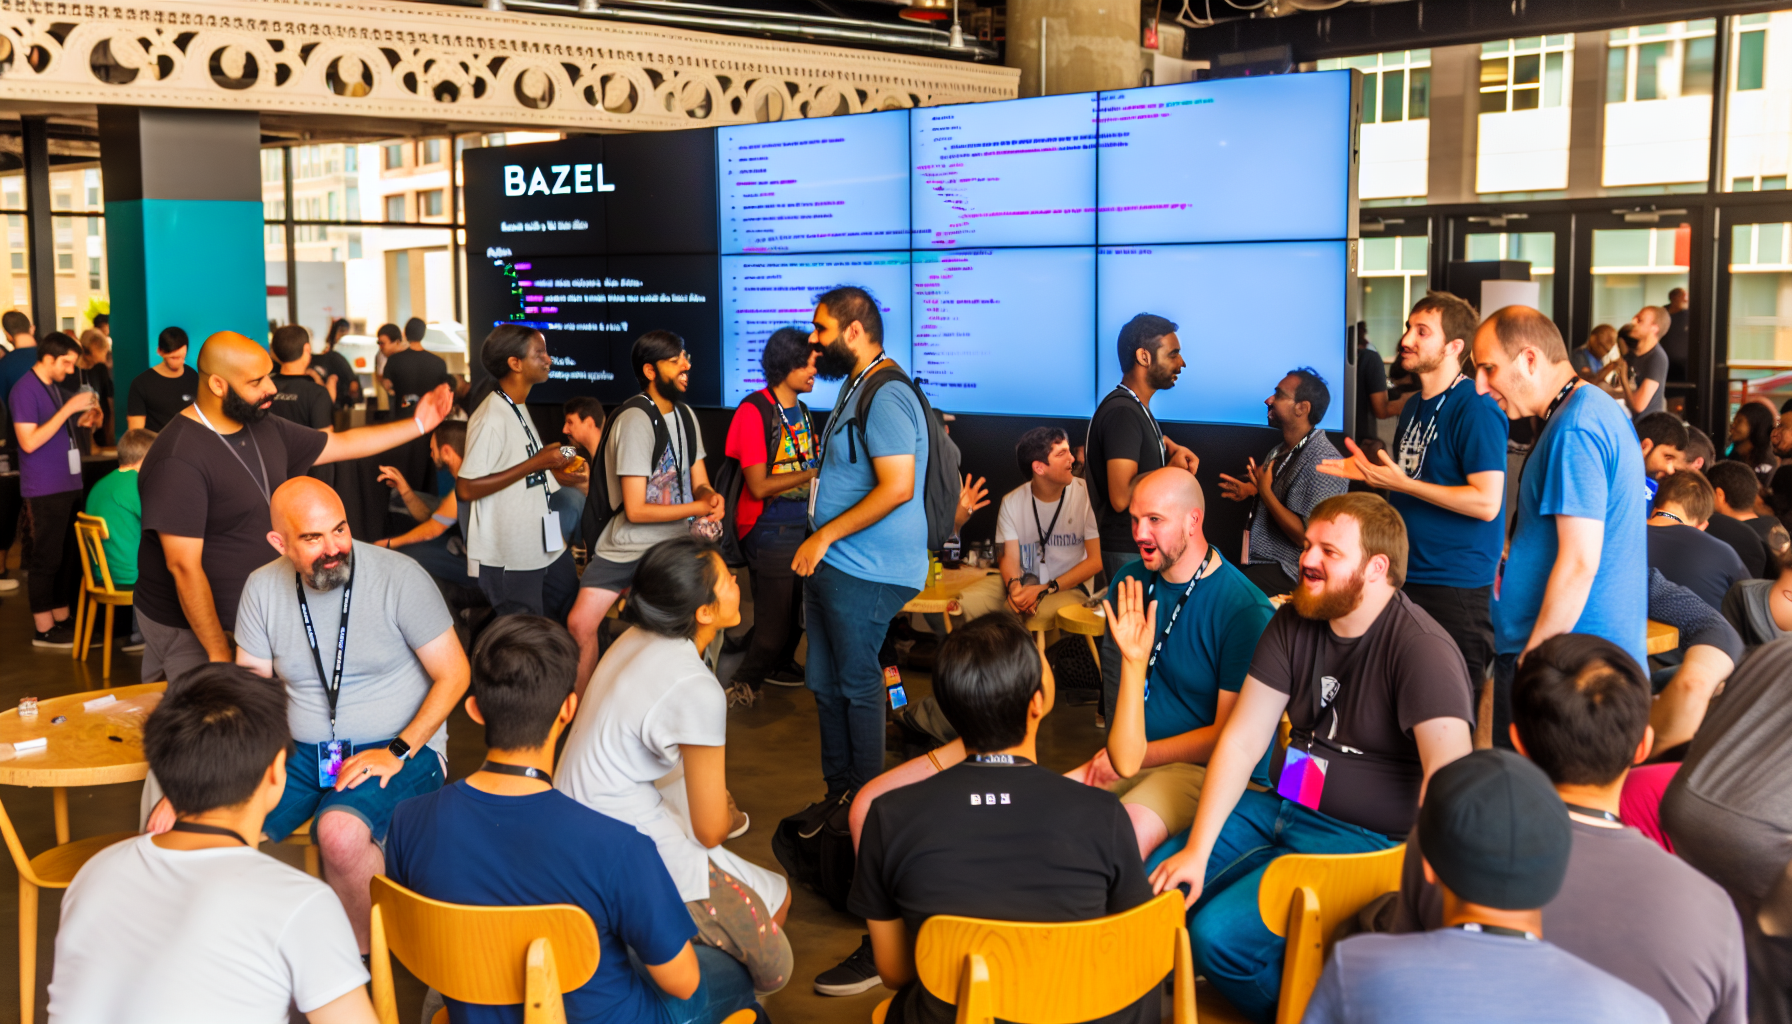 A vibrant tech community event in Los Angeles where developers are learning about Bazel